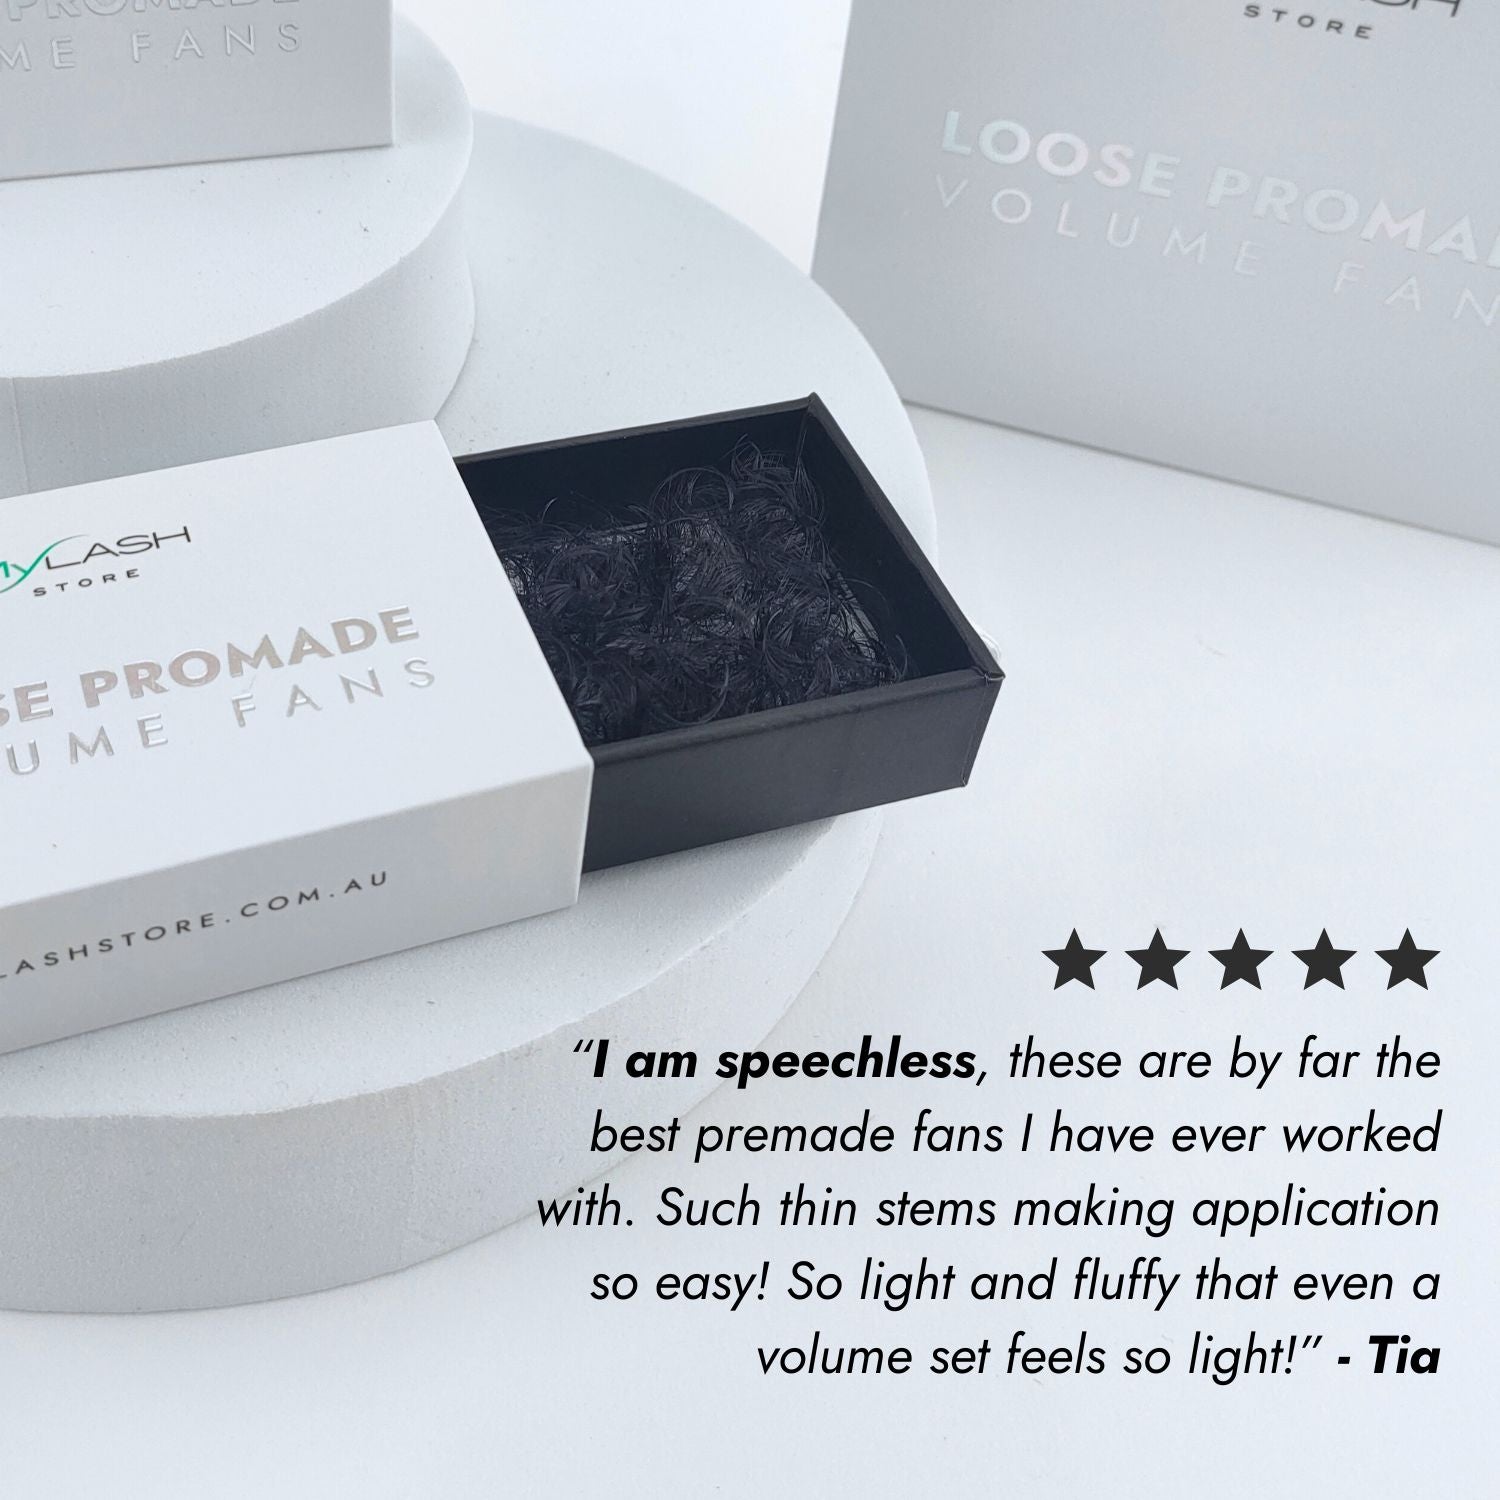 12D Loose Promade Fans - My Lash Store